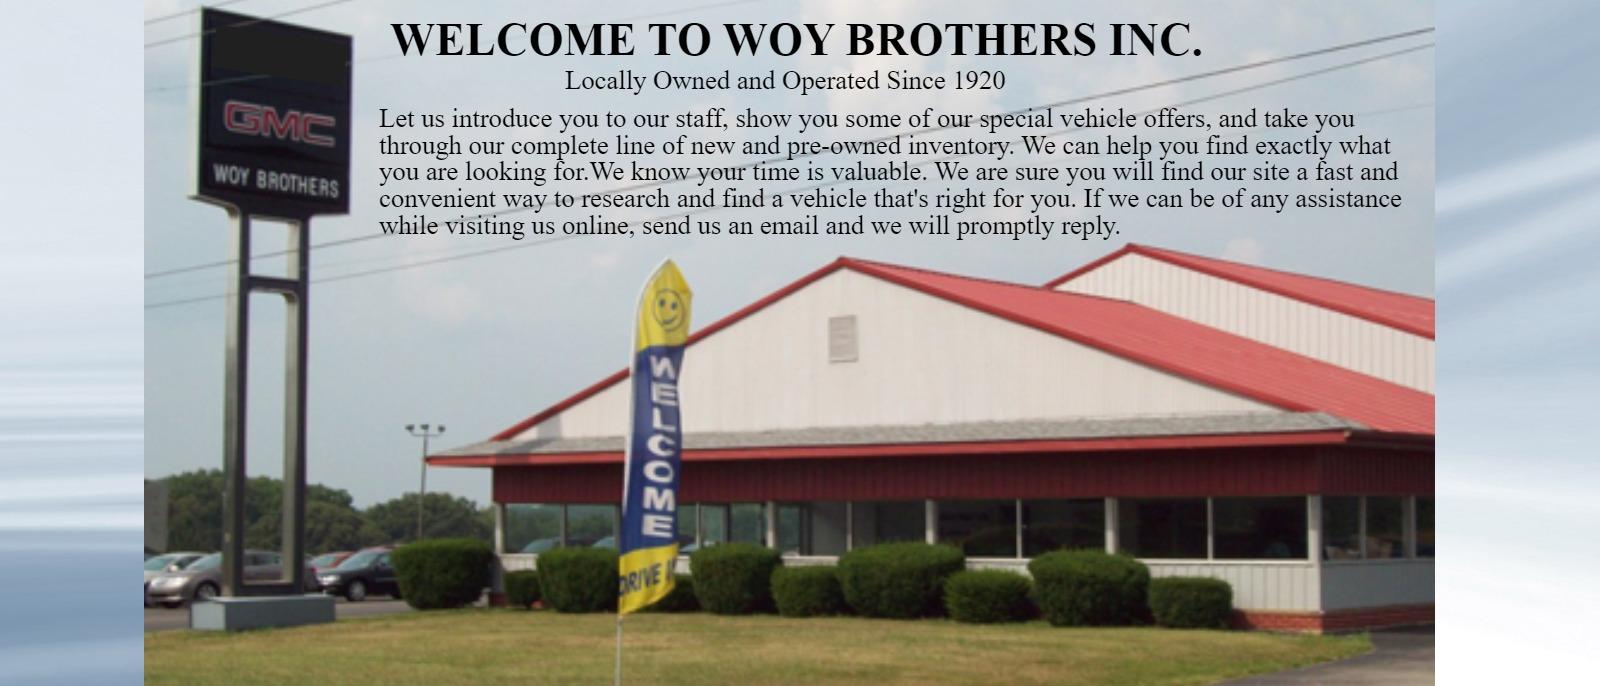 WELCOME TO WOY BROTHERS INC.